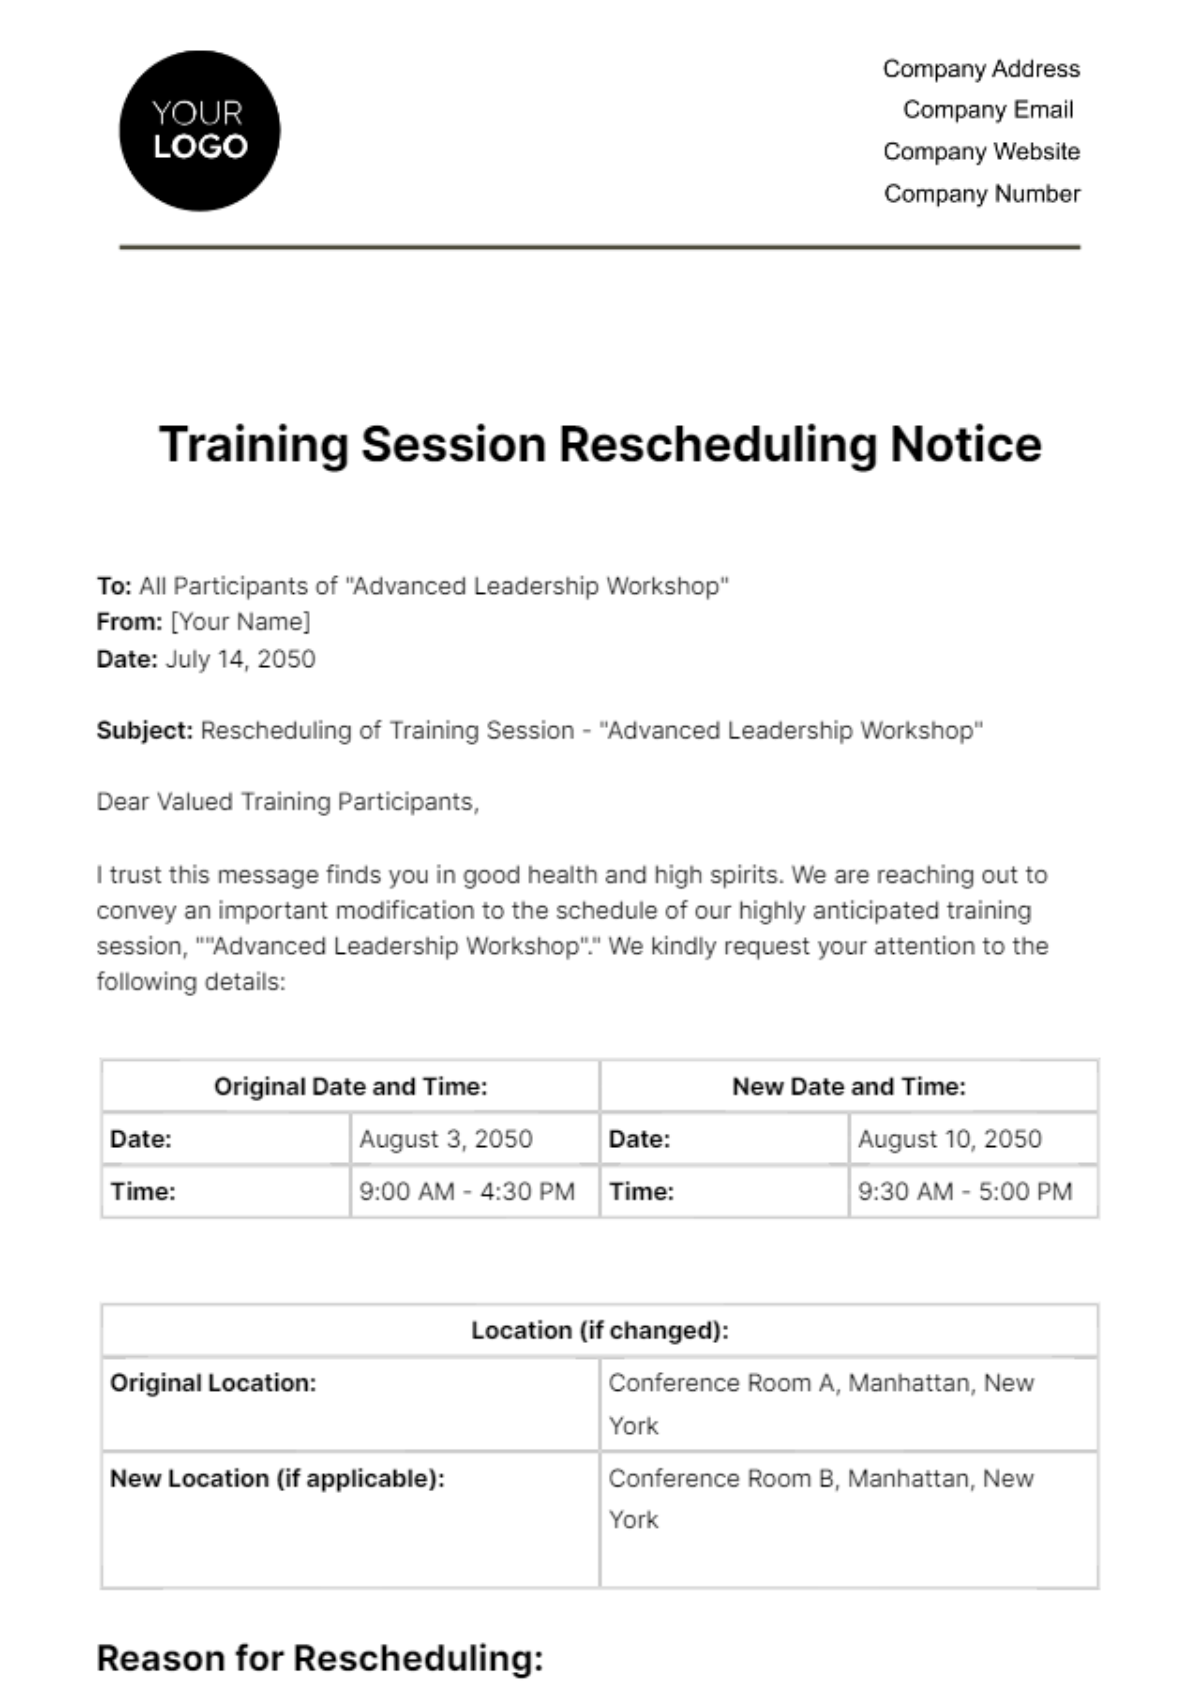 Free Training Session Rescheduling Notice HR Template